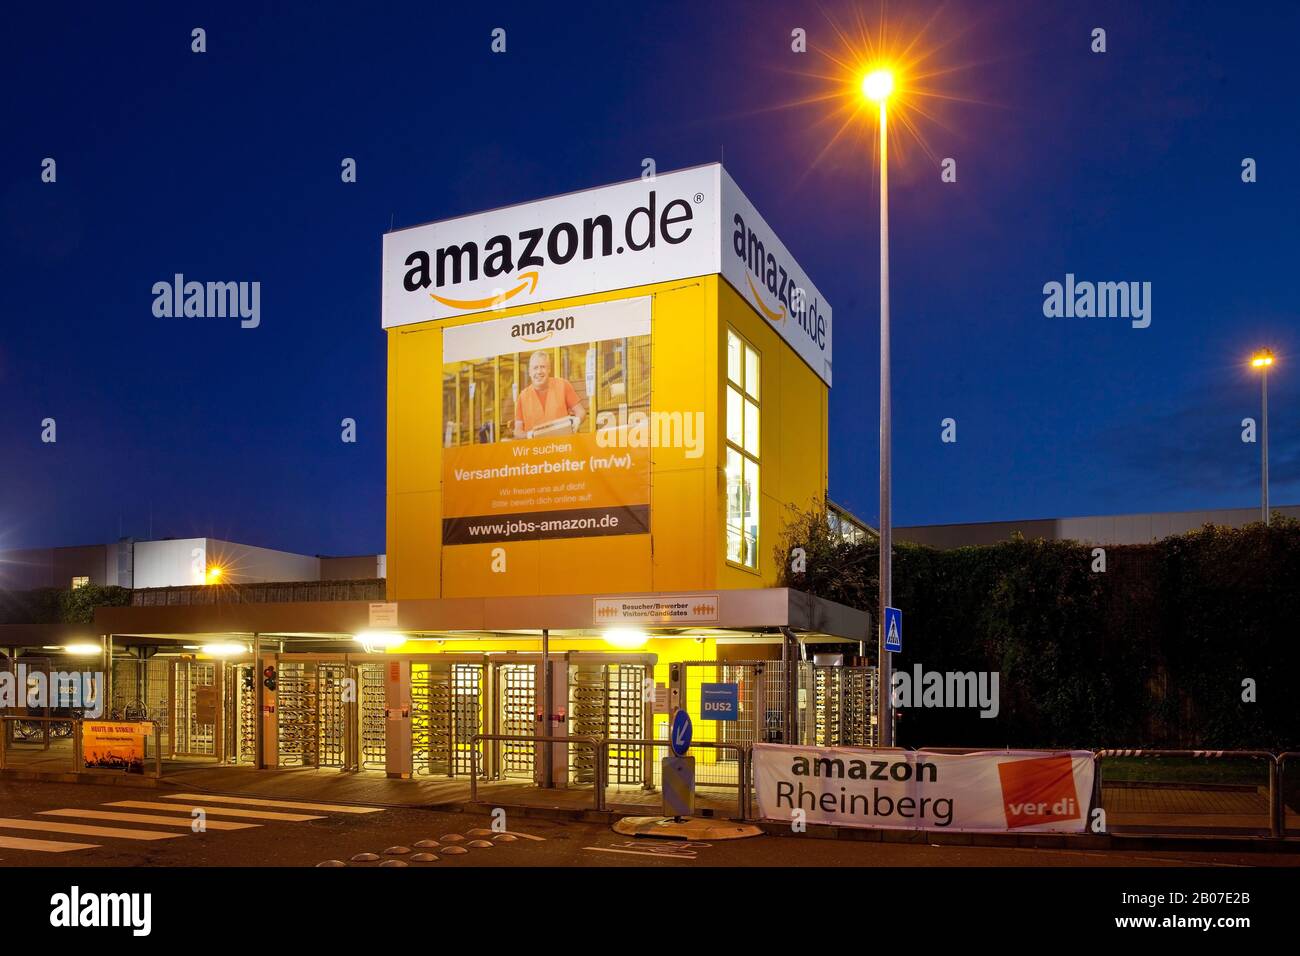 logistics centre of Amazon in the evening, one of the biggest Amazon sites in Europe, Germany, North Rhine-Westphalia, Ruhr Area, Rheinberg Stock Photo